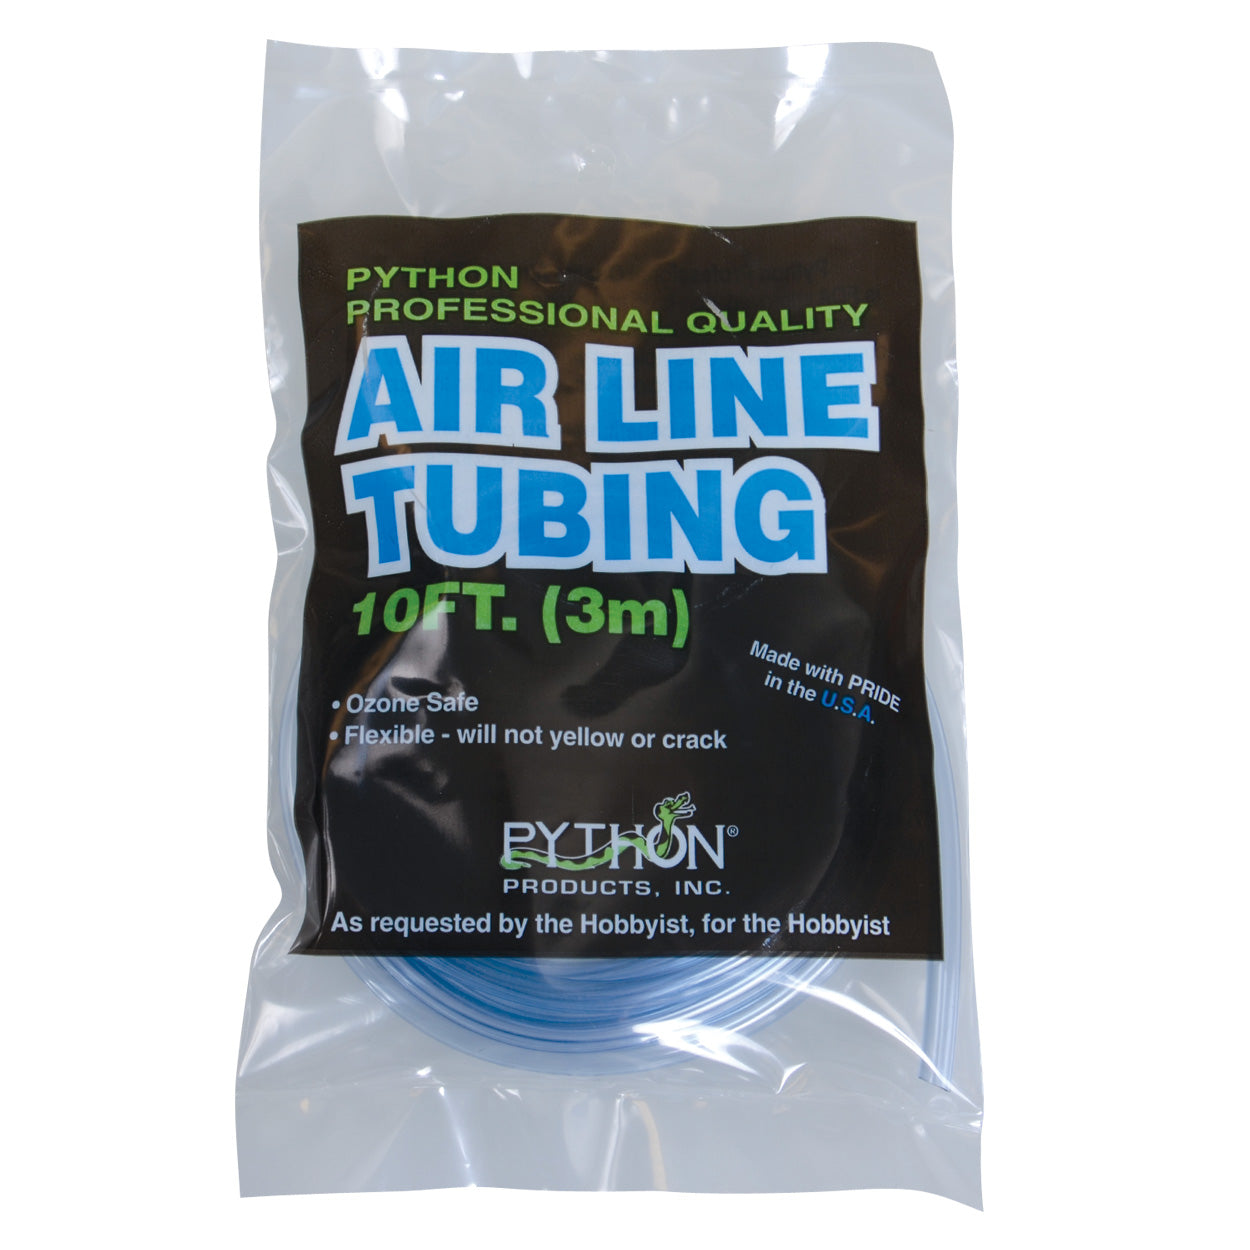 Python Airline Tubing 10Ft